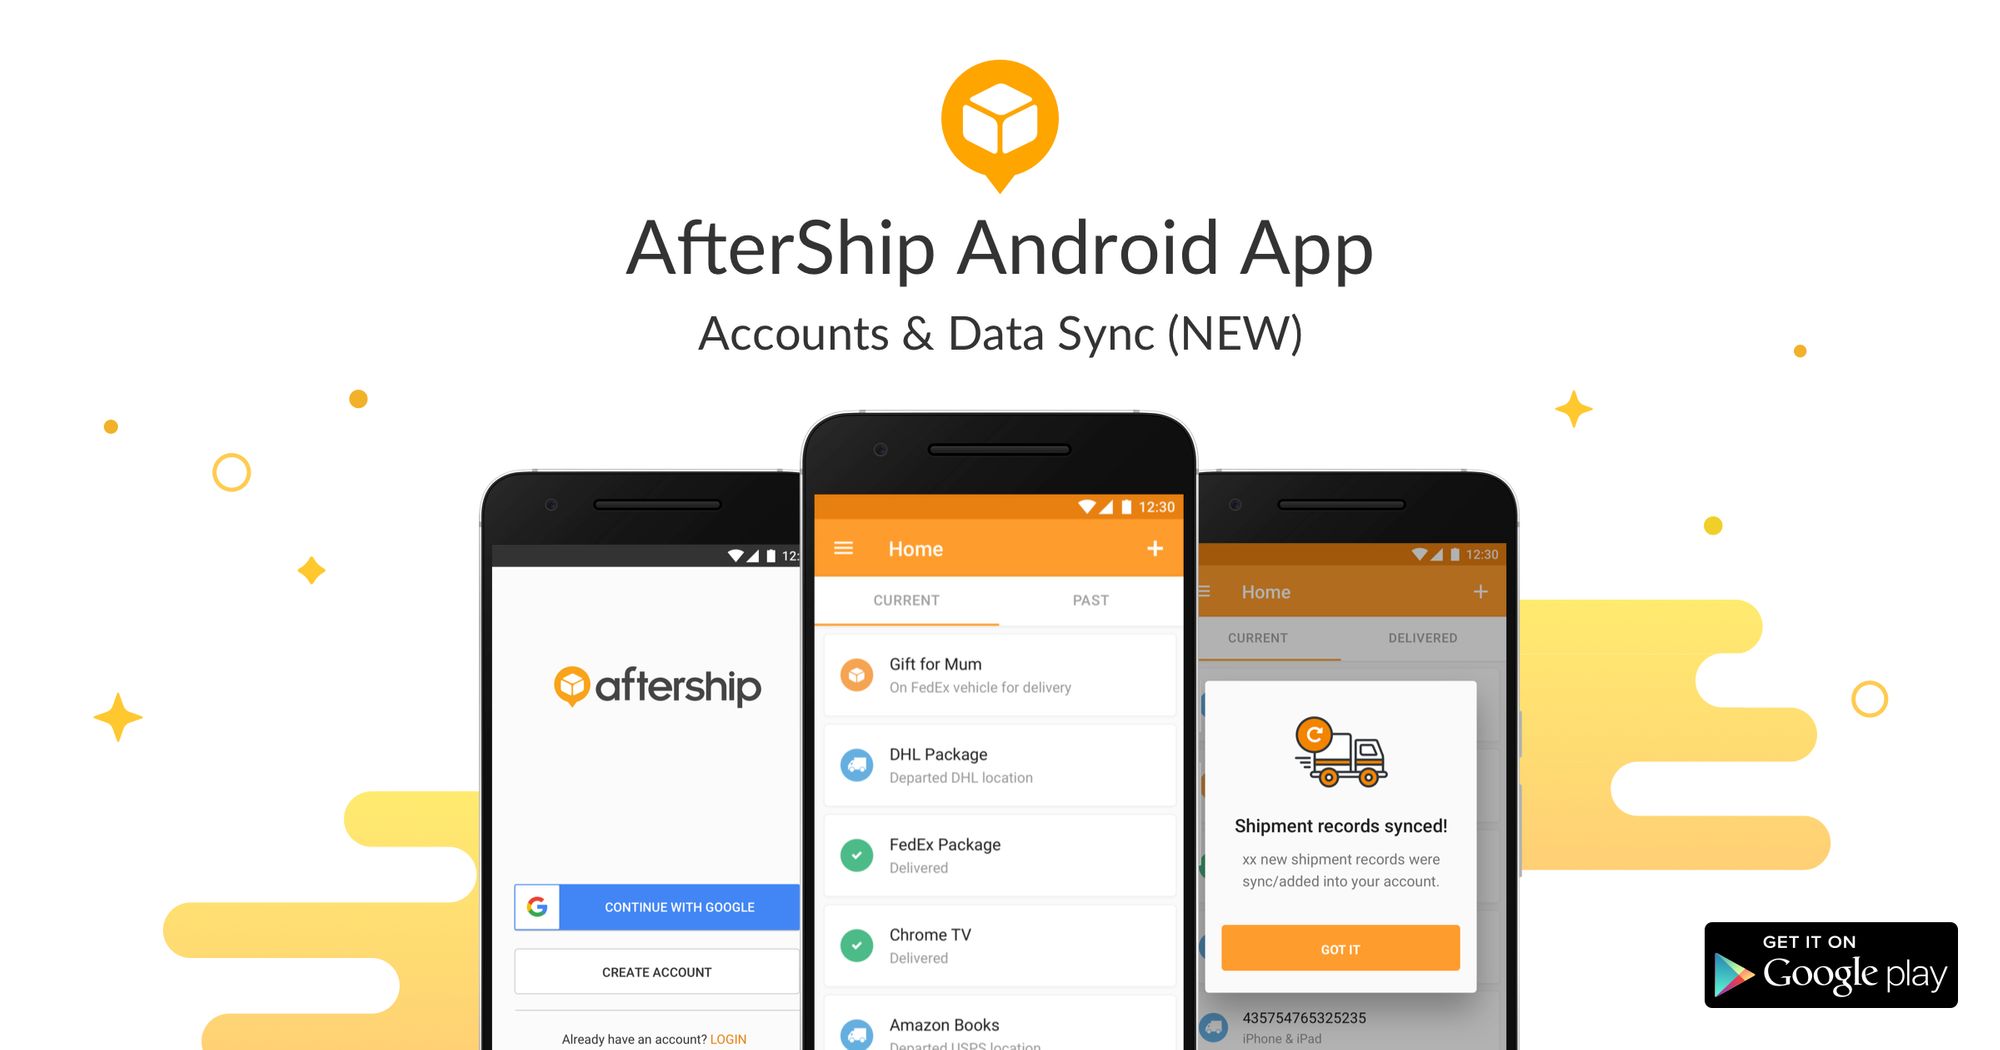 Product Update: Accounts & Data Sync for our Android App